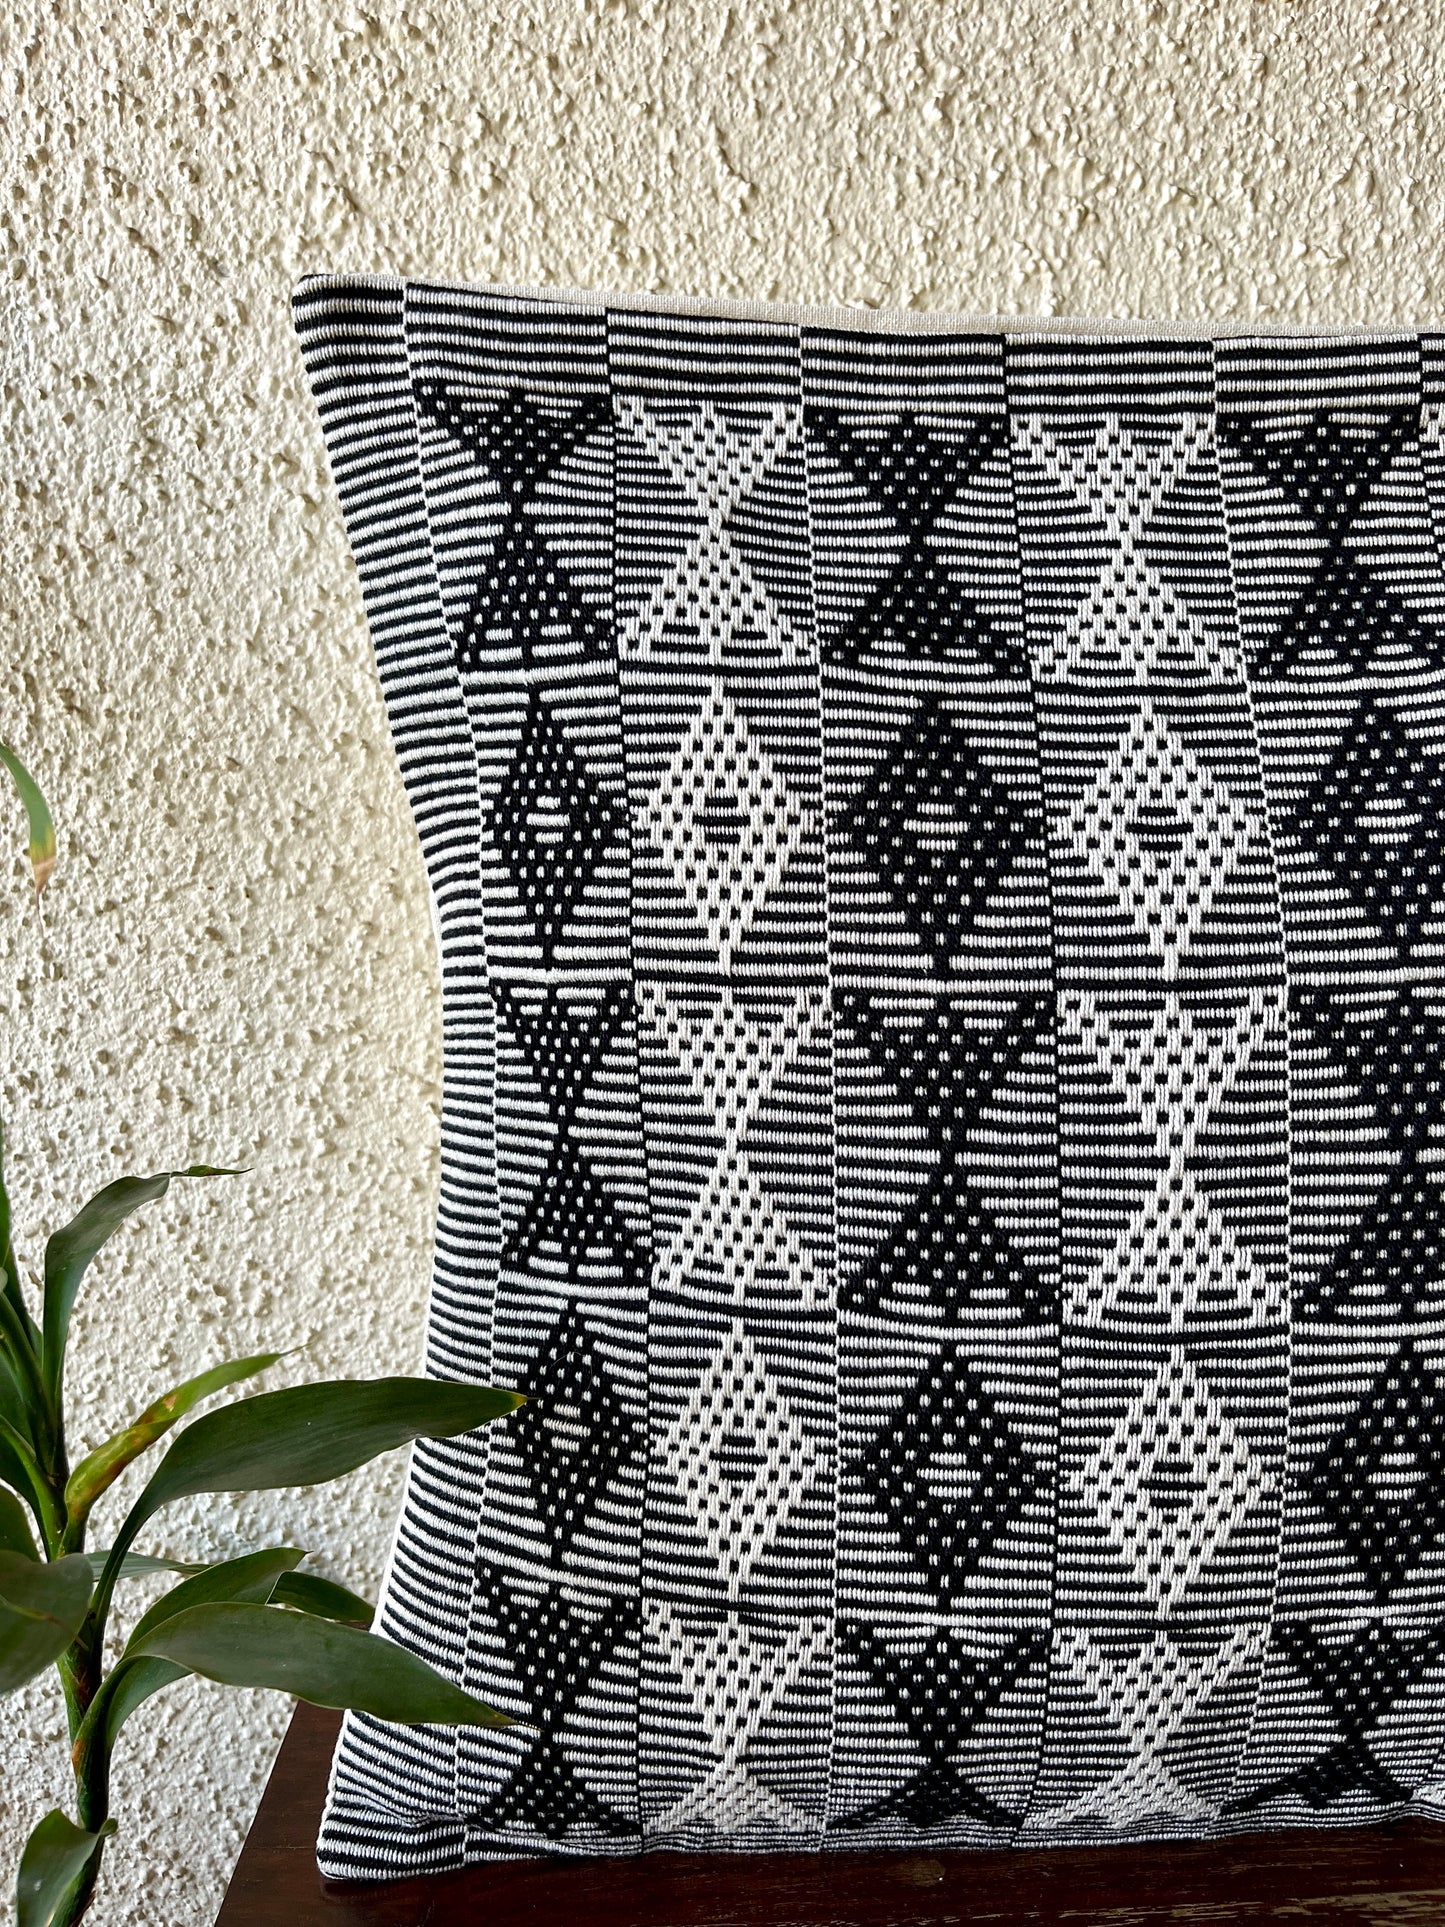 Chizami Weaves - Loin Loom Handwoven Cushion Cover Set with White and Black Motifs (Set of 4)